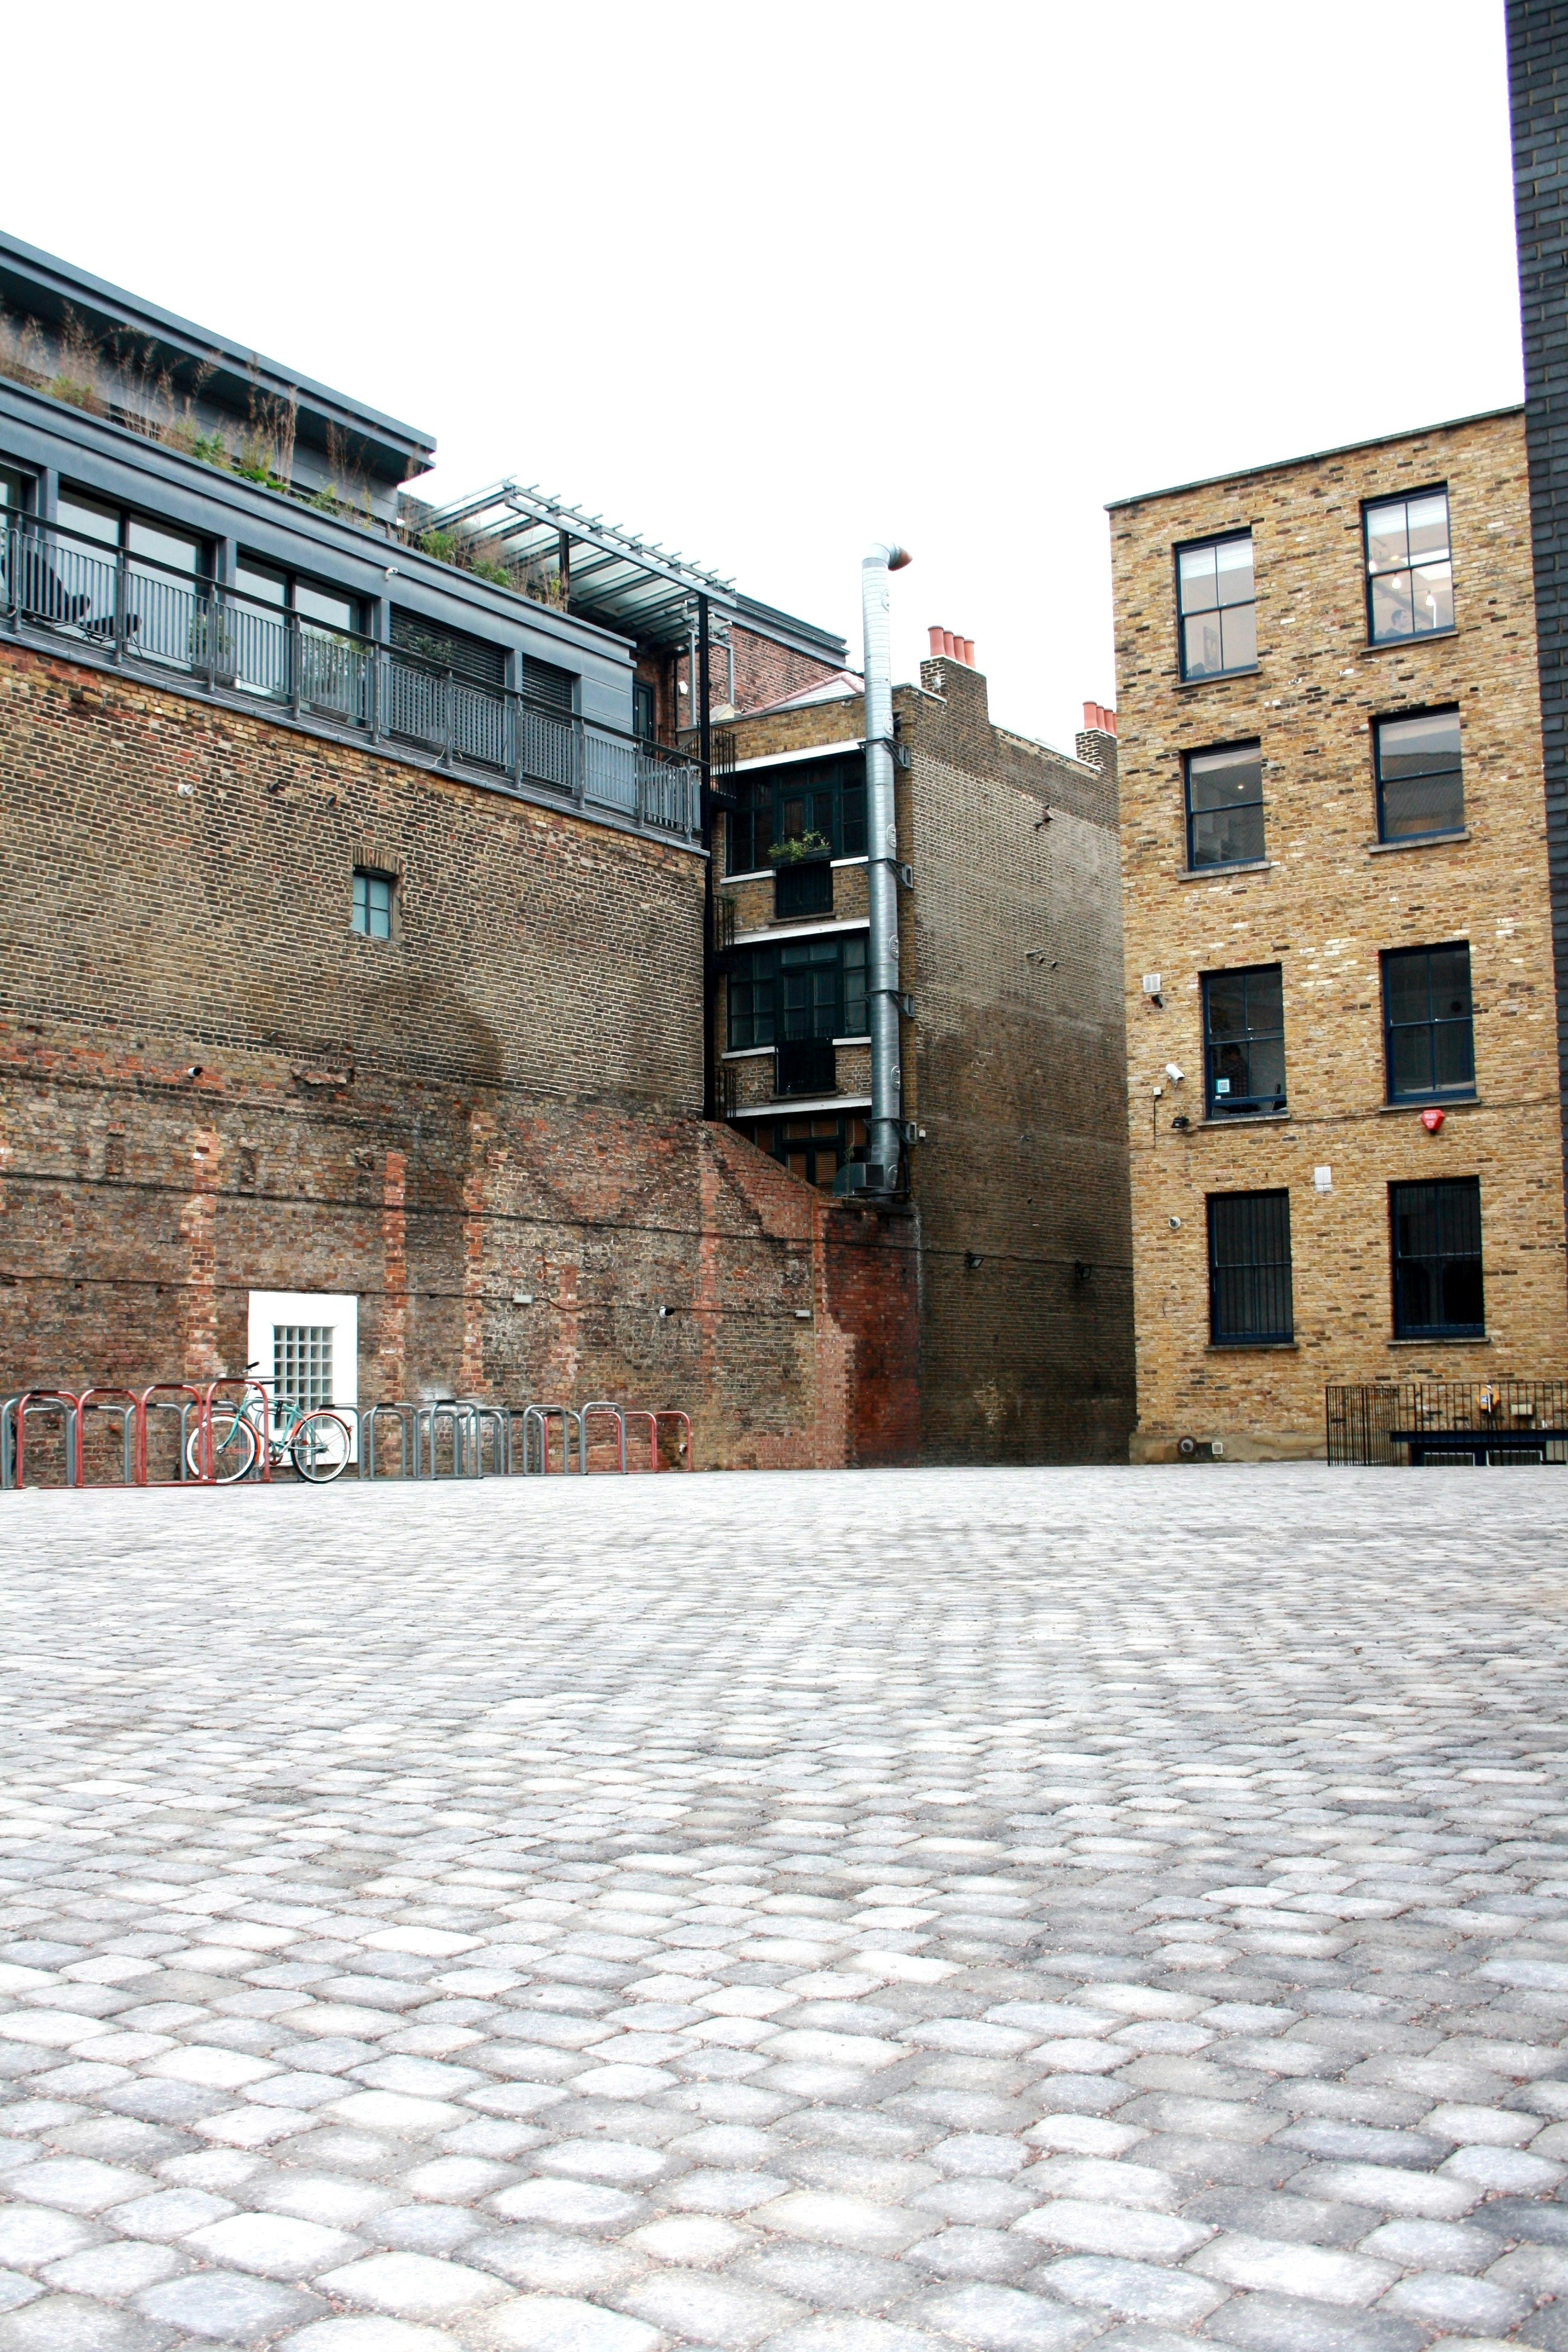 Shoreditch Electric Light Station - Courtyard image 4